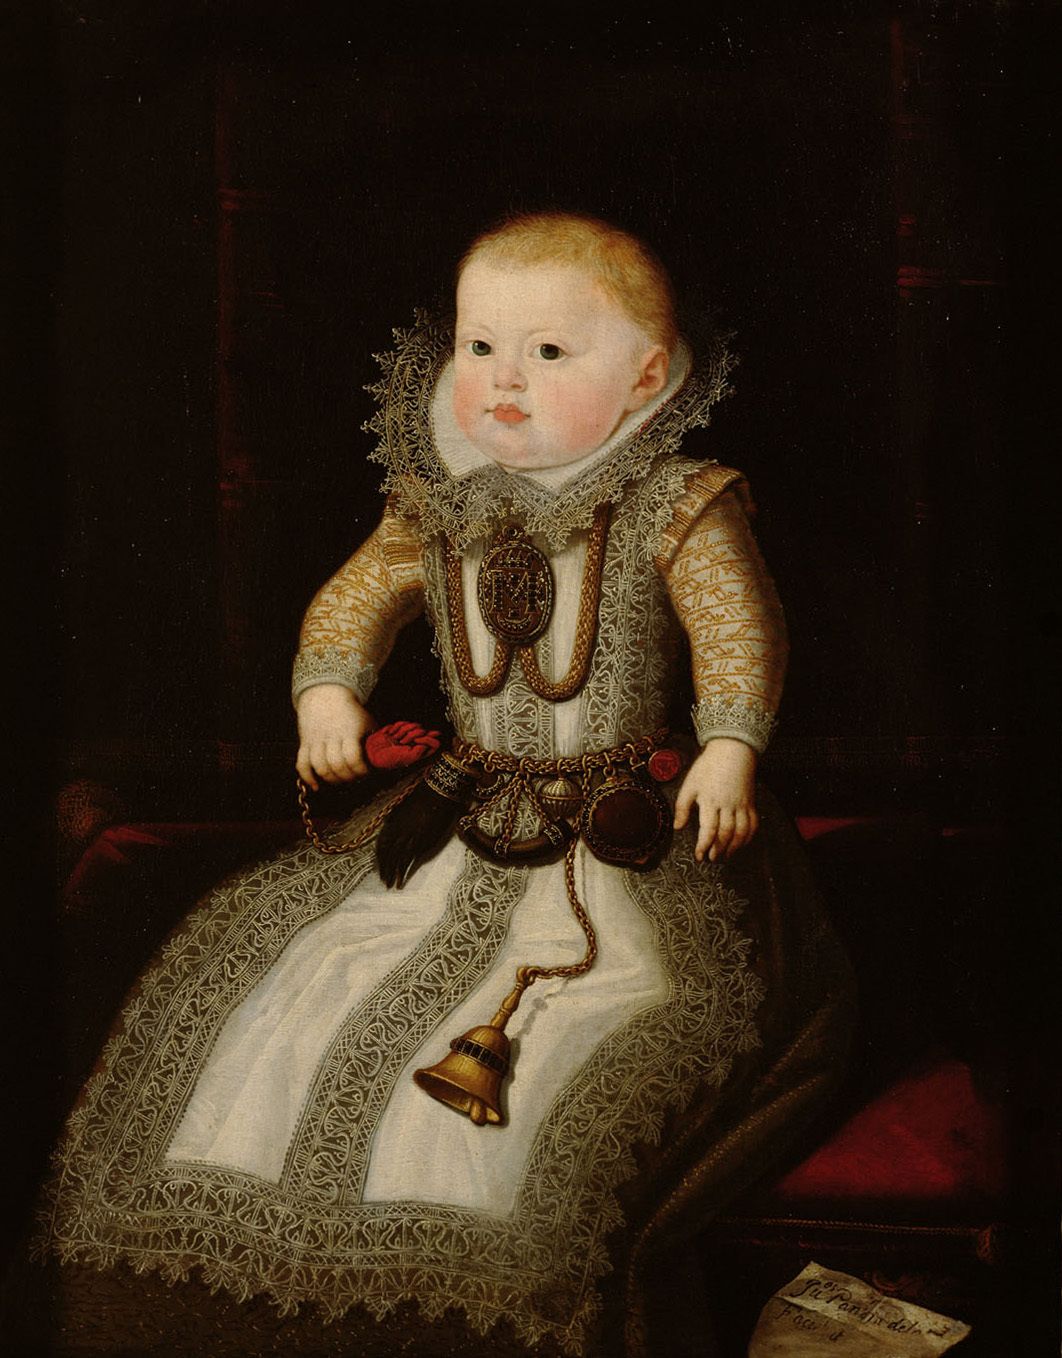 Portrait of the Infant Maria Anna, by Juan Pantoja de la Cruz c. 1607.  She wears nine protective ornaments including a fica, badger's paw, bird's claw, apotropaic bell and pomander. Kunsthistorisches Museum